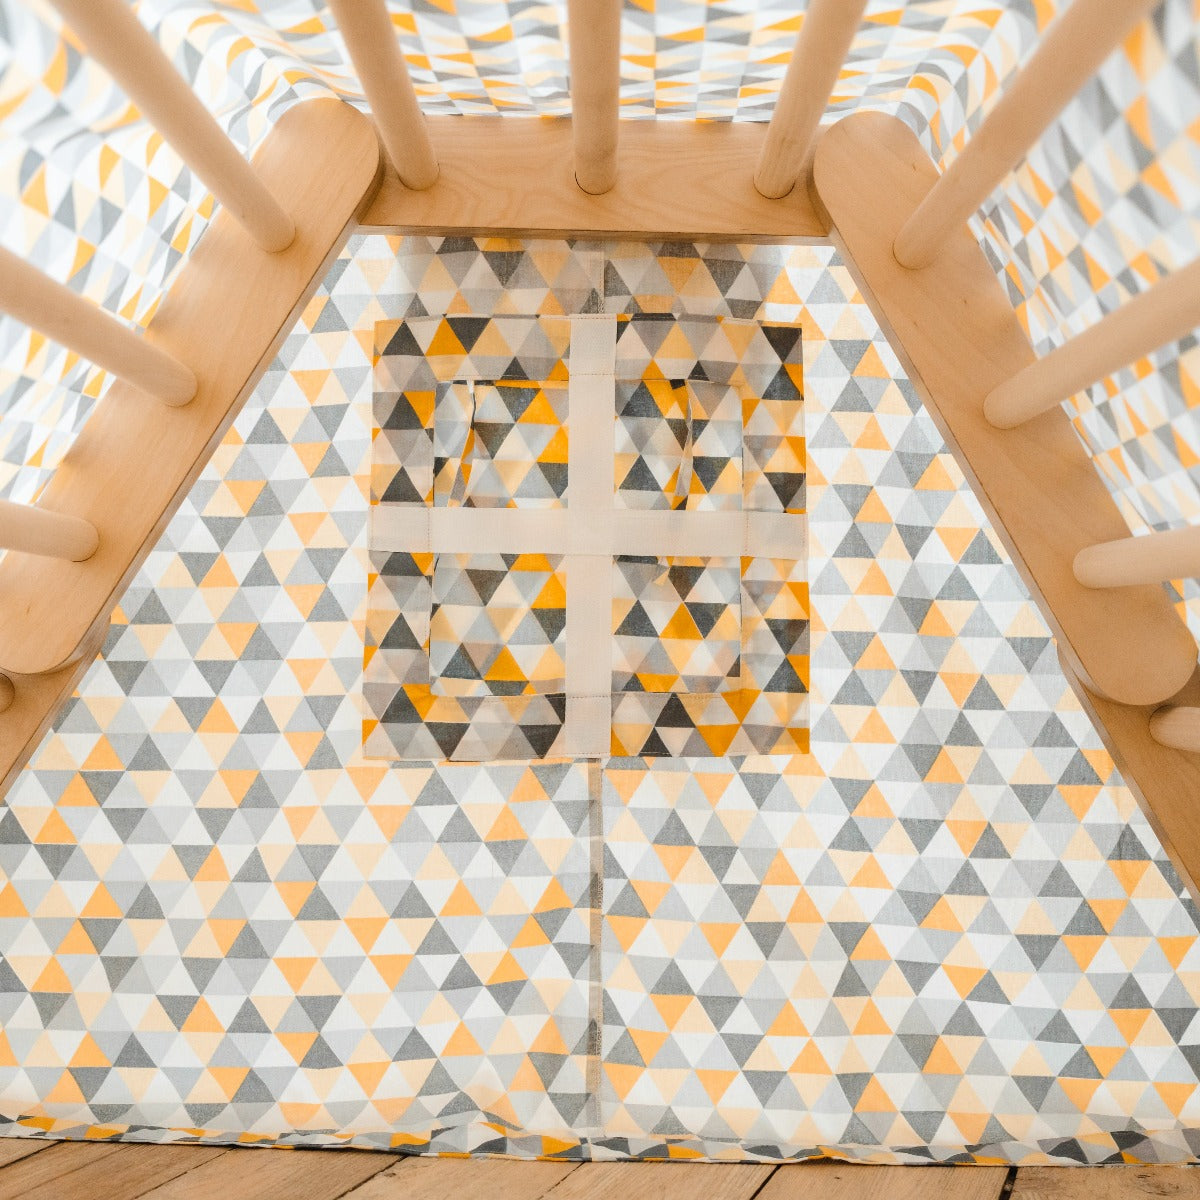 Play Tent • Climbing Frame add-on • for SIPITRI (with MOFI) and FIPITRI